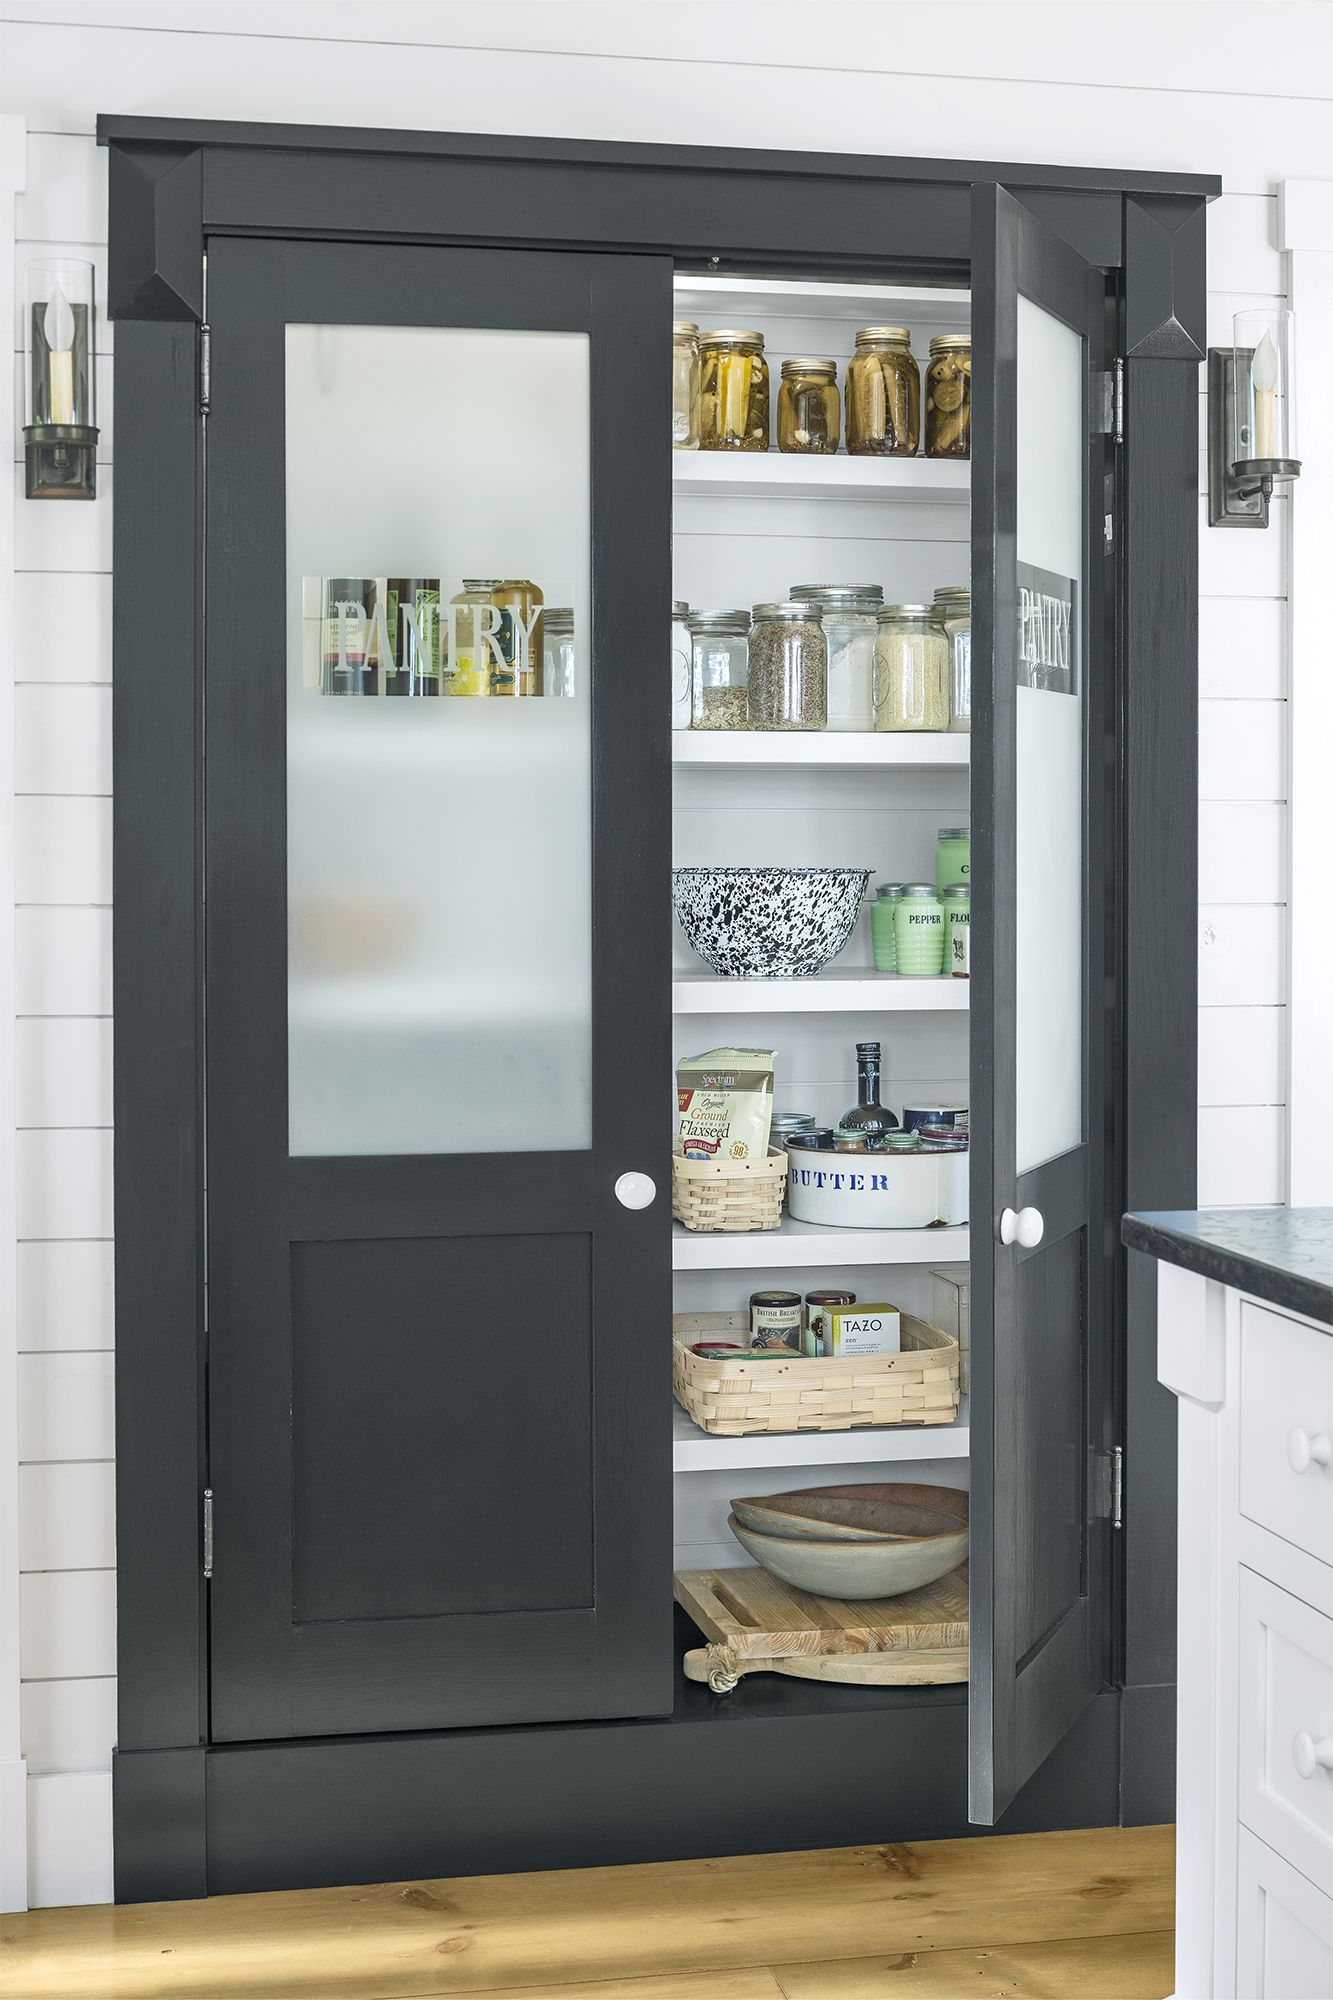 https://hips.hearstapps.com/hmg-prod/images/pantry-organization-ideas-frosted-glass-1580410274.jpg